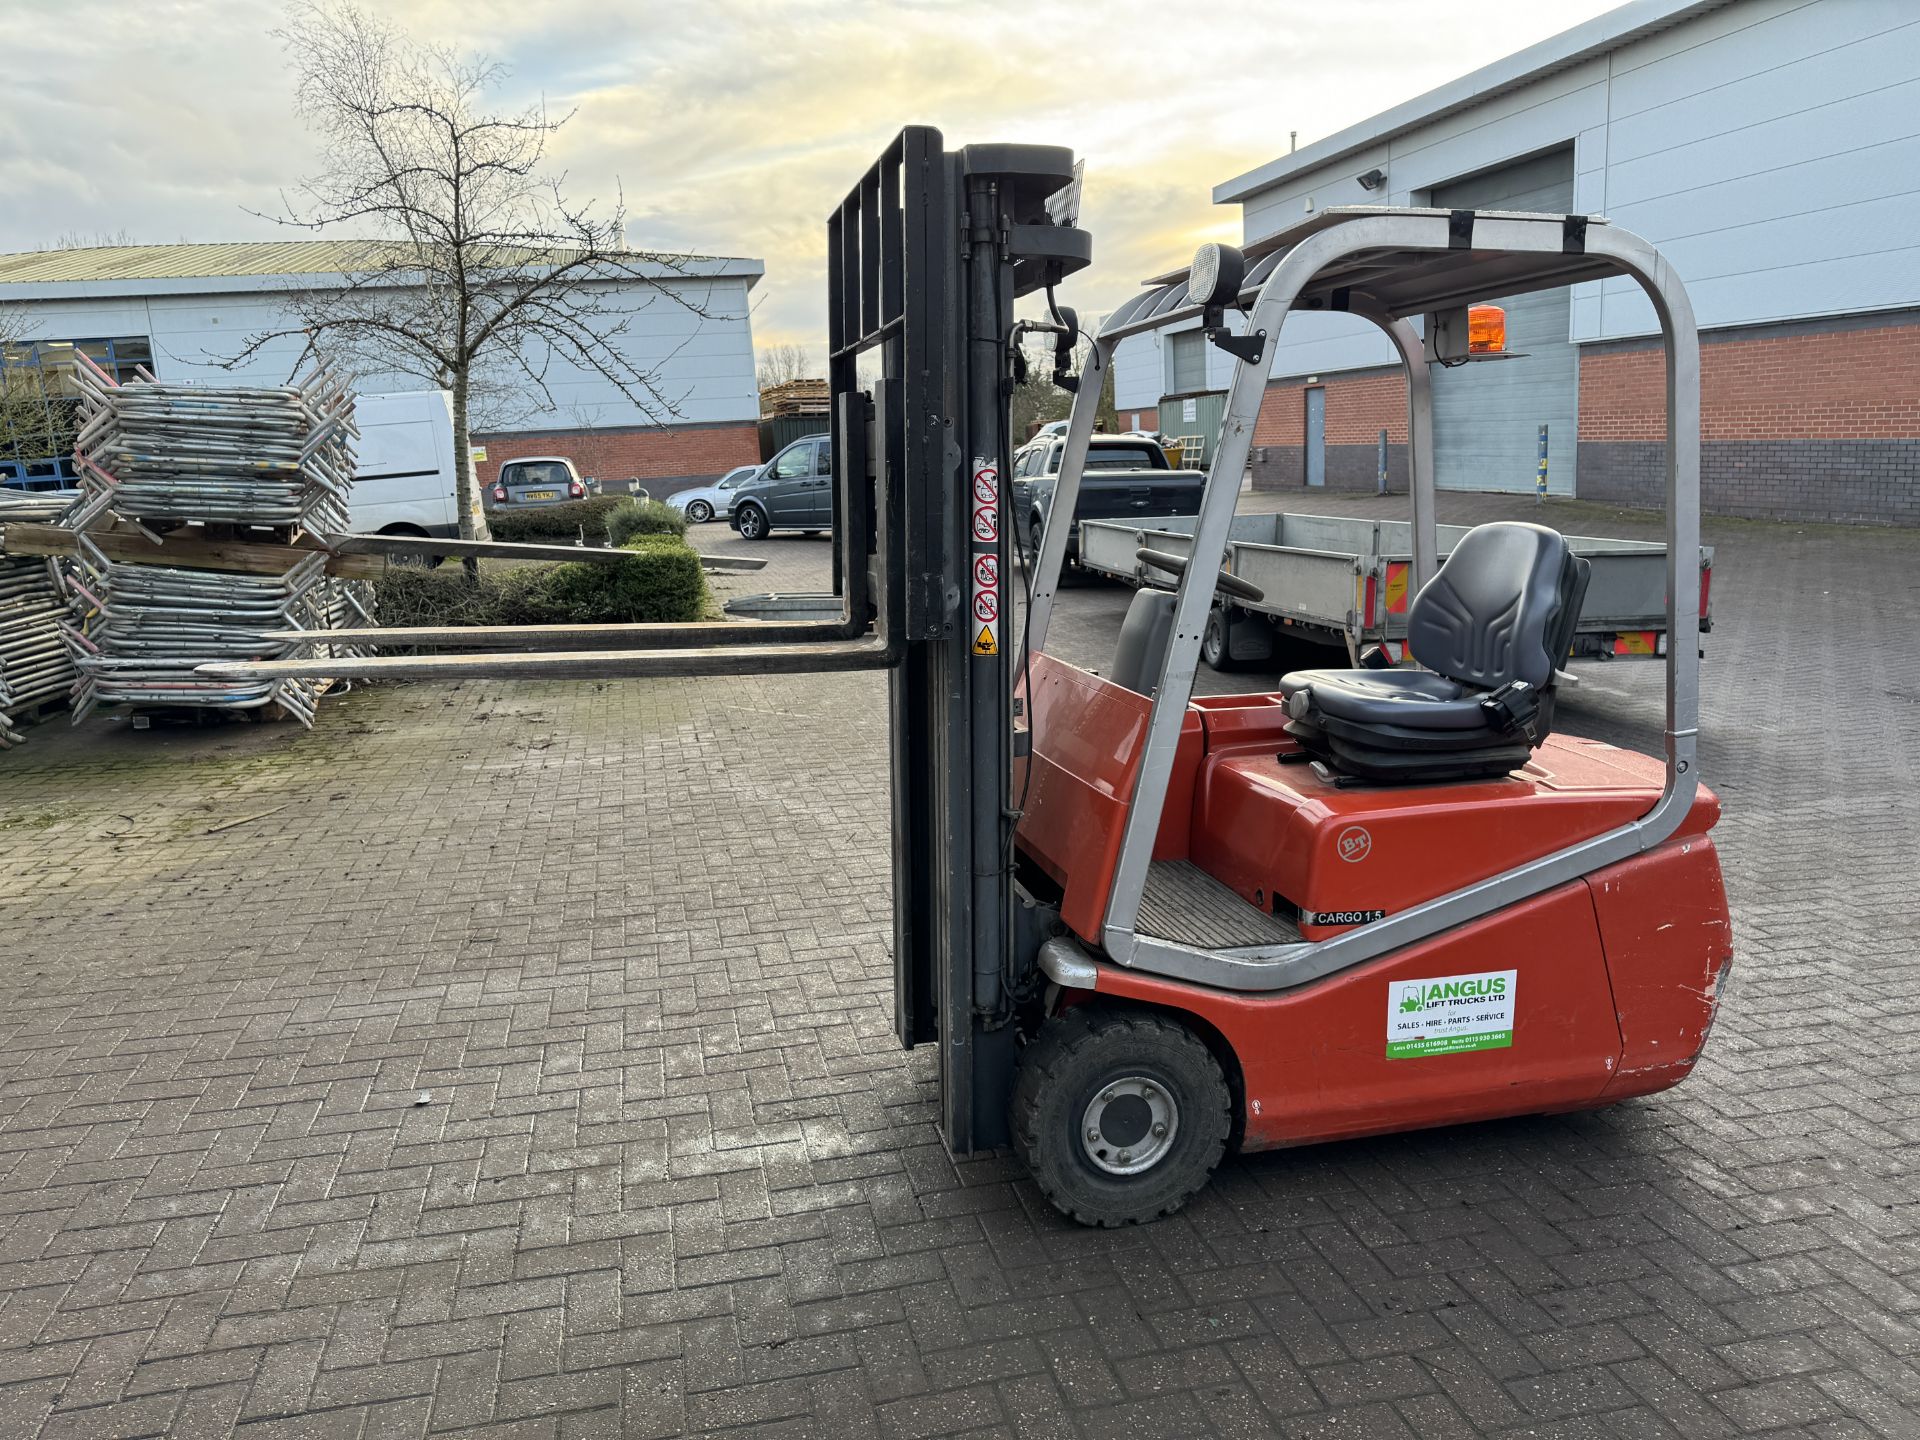 Cargo Model C 3 E 150 Tri Wheel Container Specification Electric Reach Truck - Image 10 of 28